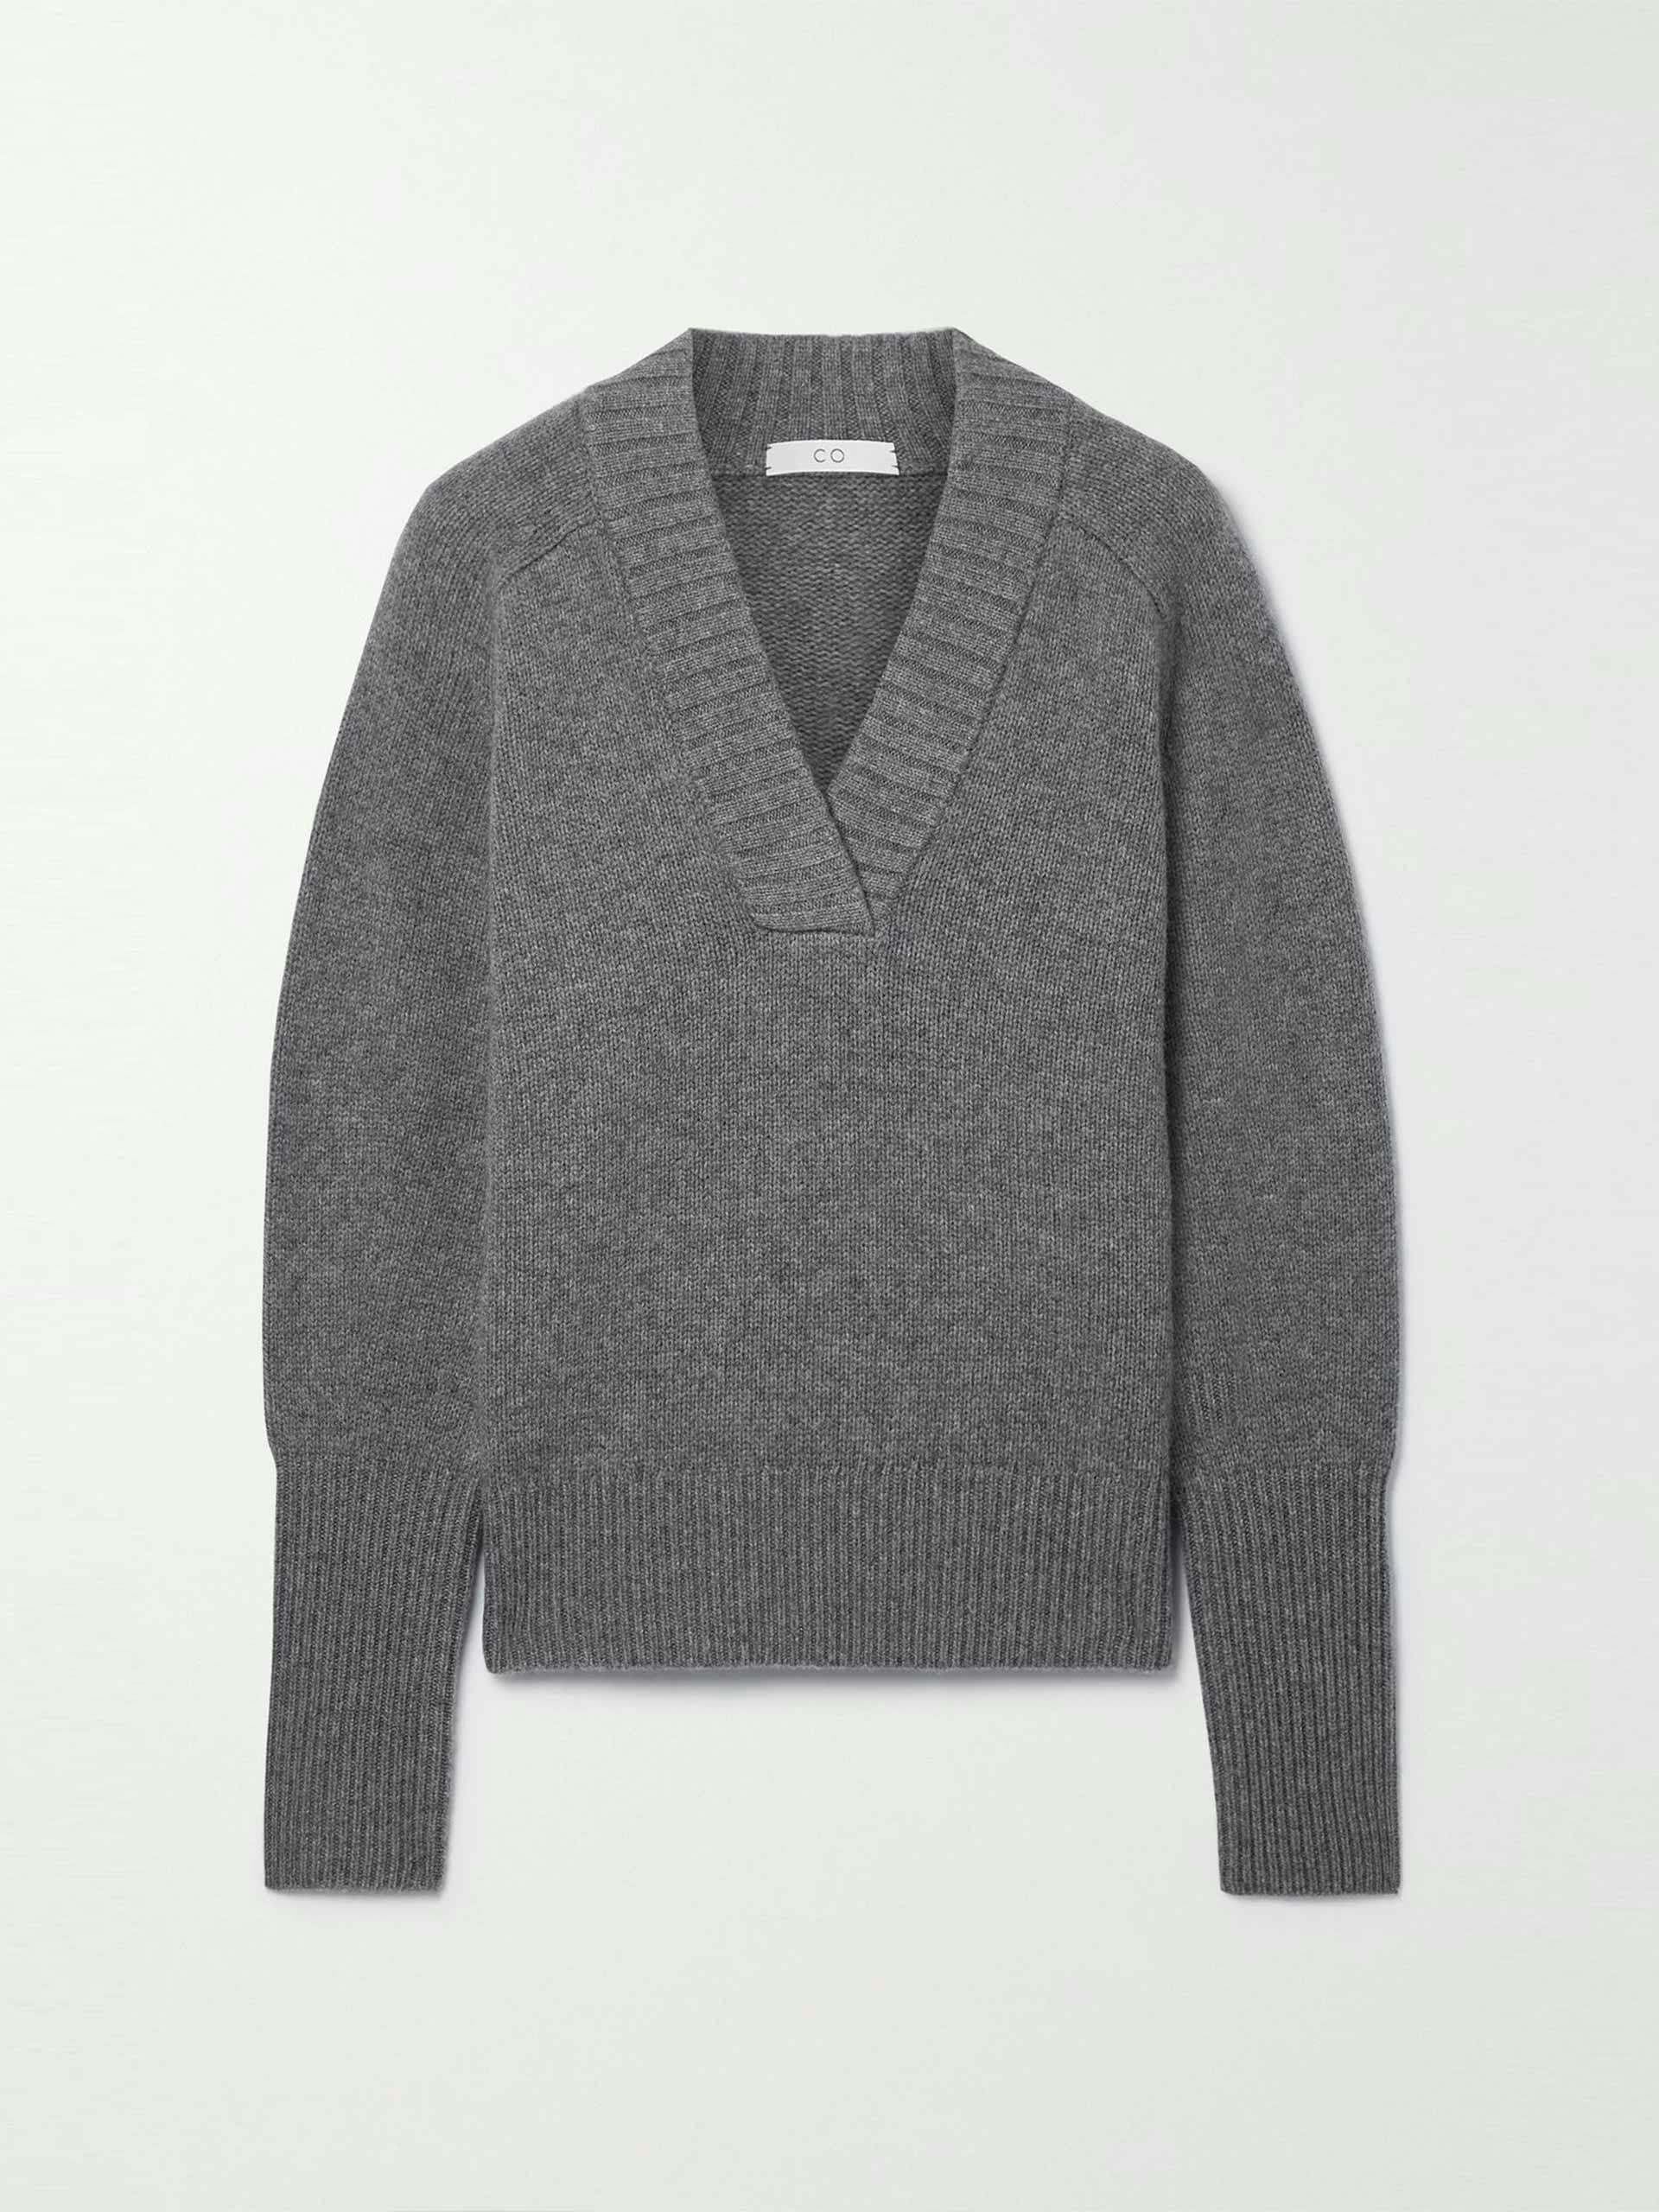 Grey wool and cashmere jumper